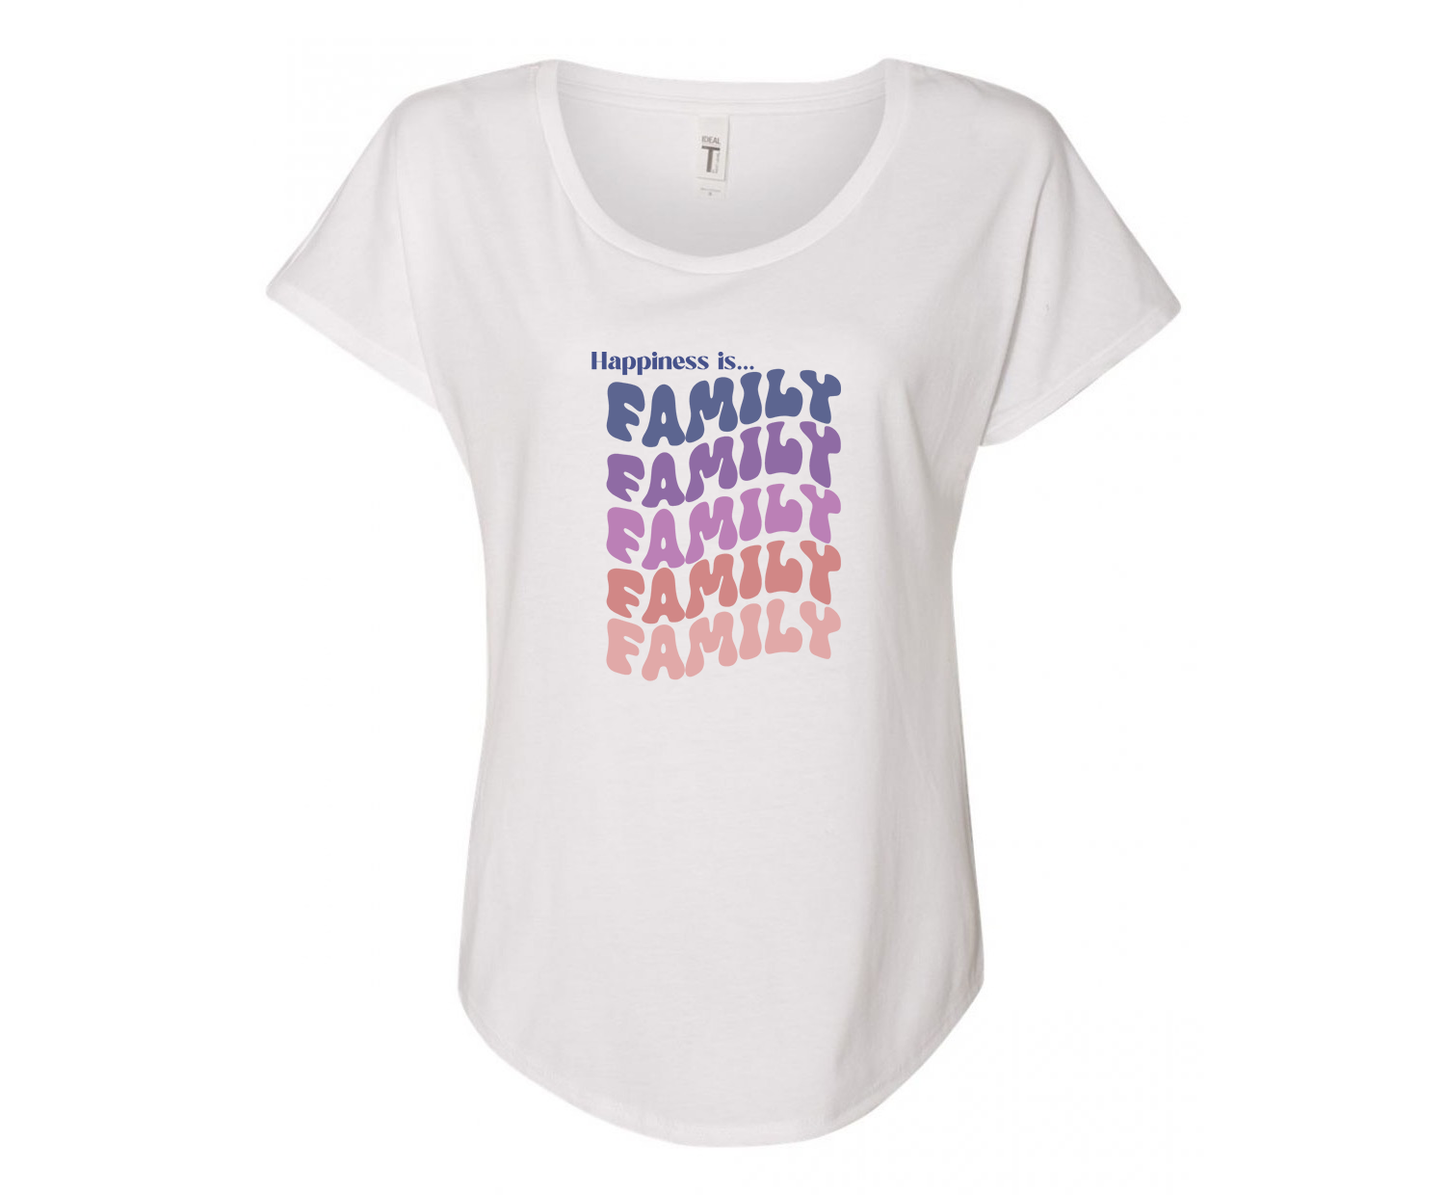 Happiness is Family Ladies Tee Shirt - In White & Grey